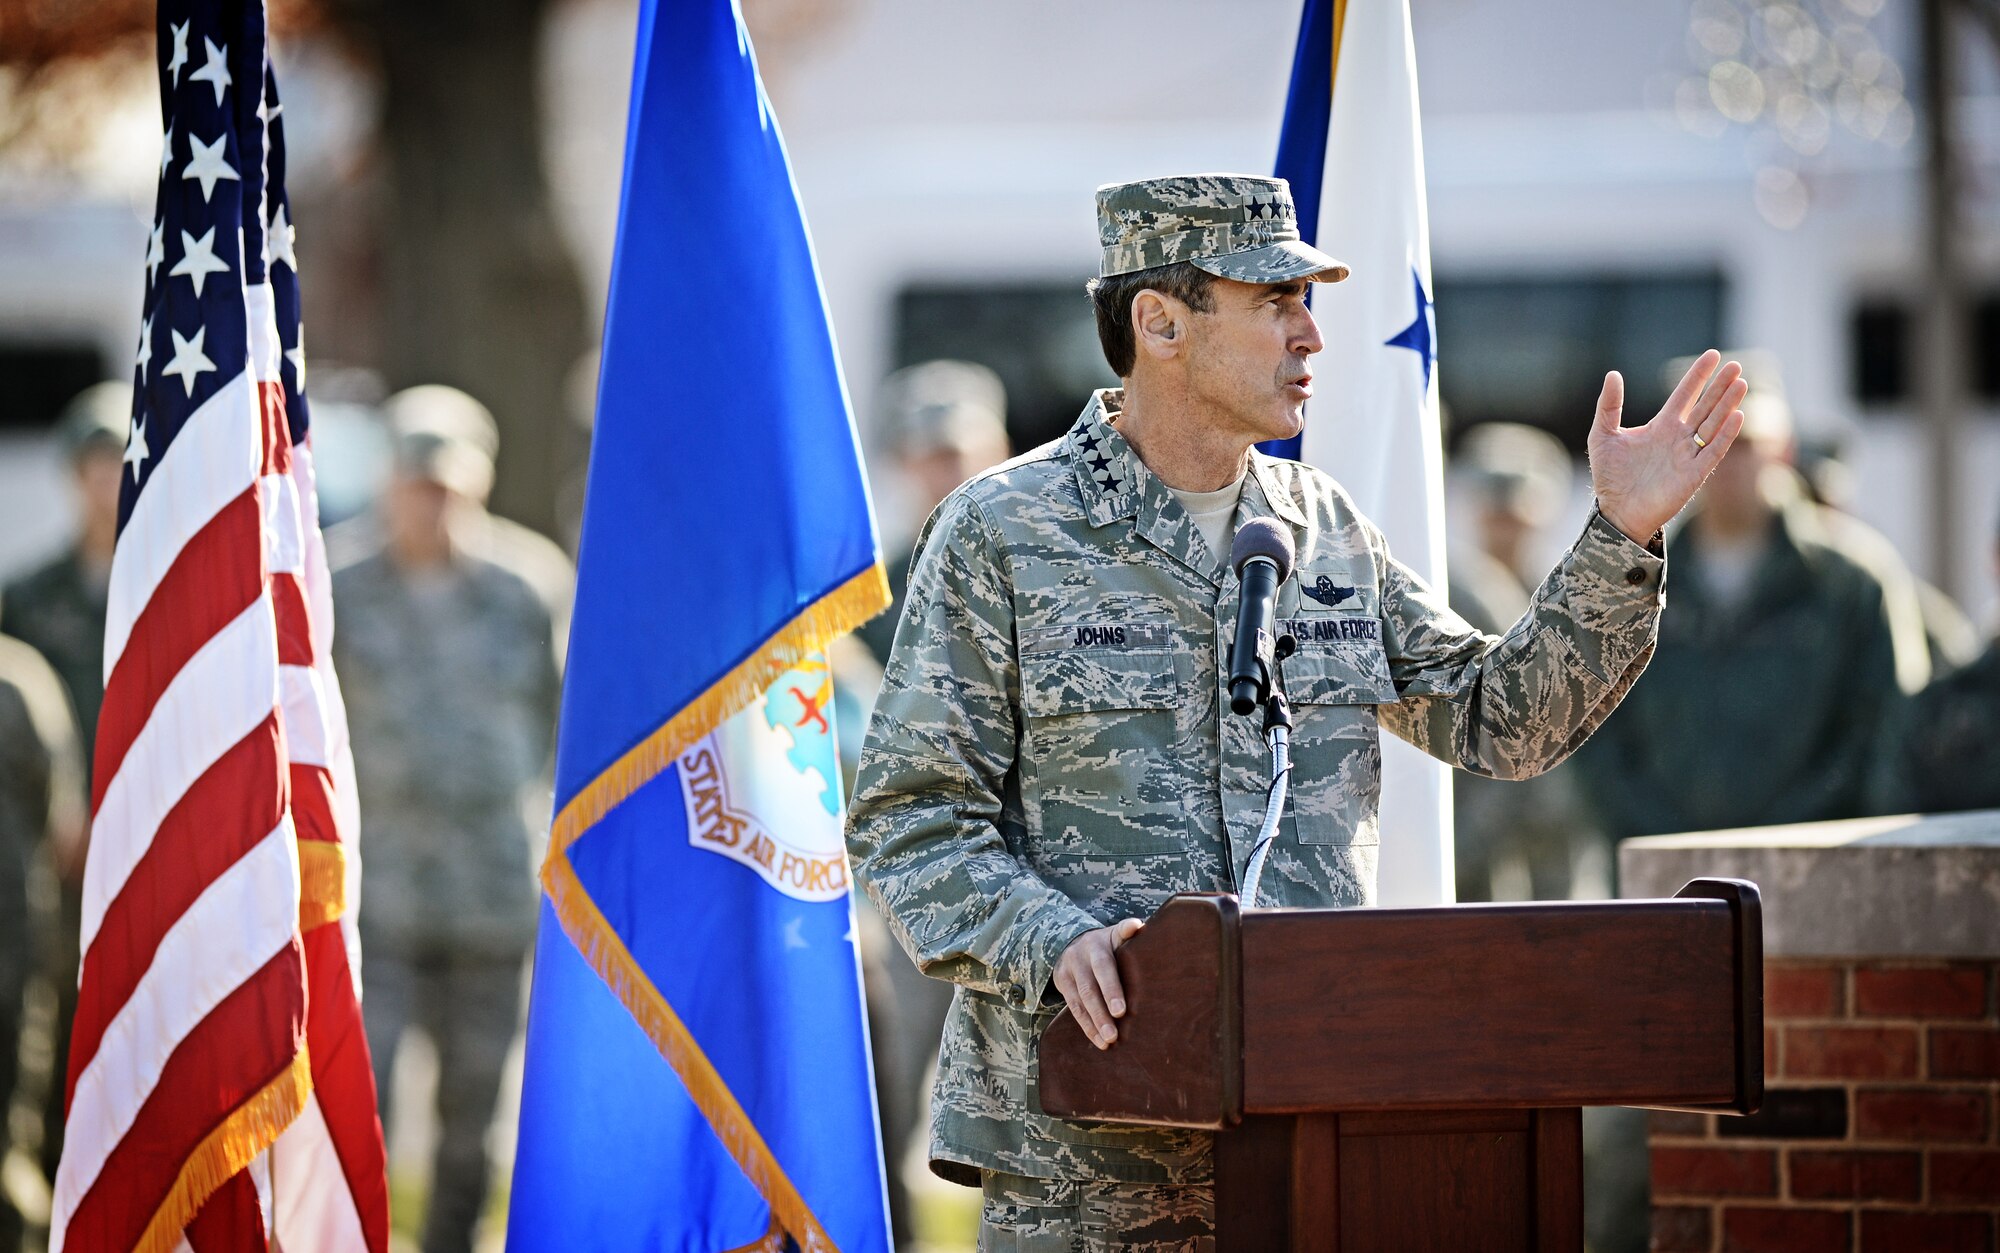 Gen. Raymond E. Johns Jr., Air Mobility Command commander, gives his farewell speech during the change of command ceremony at Scott Air Force Base Nov. 30, 2012. Johns served 35 years in the Air Force, commanding more than 130,000 Airmen as well as reaching 4,500 flight hours in various aircraft. The incoming AMC commander, Gen. Paul J. Selva, was previously assigned as the assistant to the Chairman of the Joint Chiefs of Staff in Washington D.C. (U.S. Air Force photo/Staff Sgt. Ryan Crane)